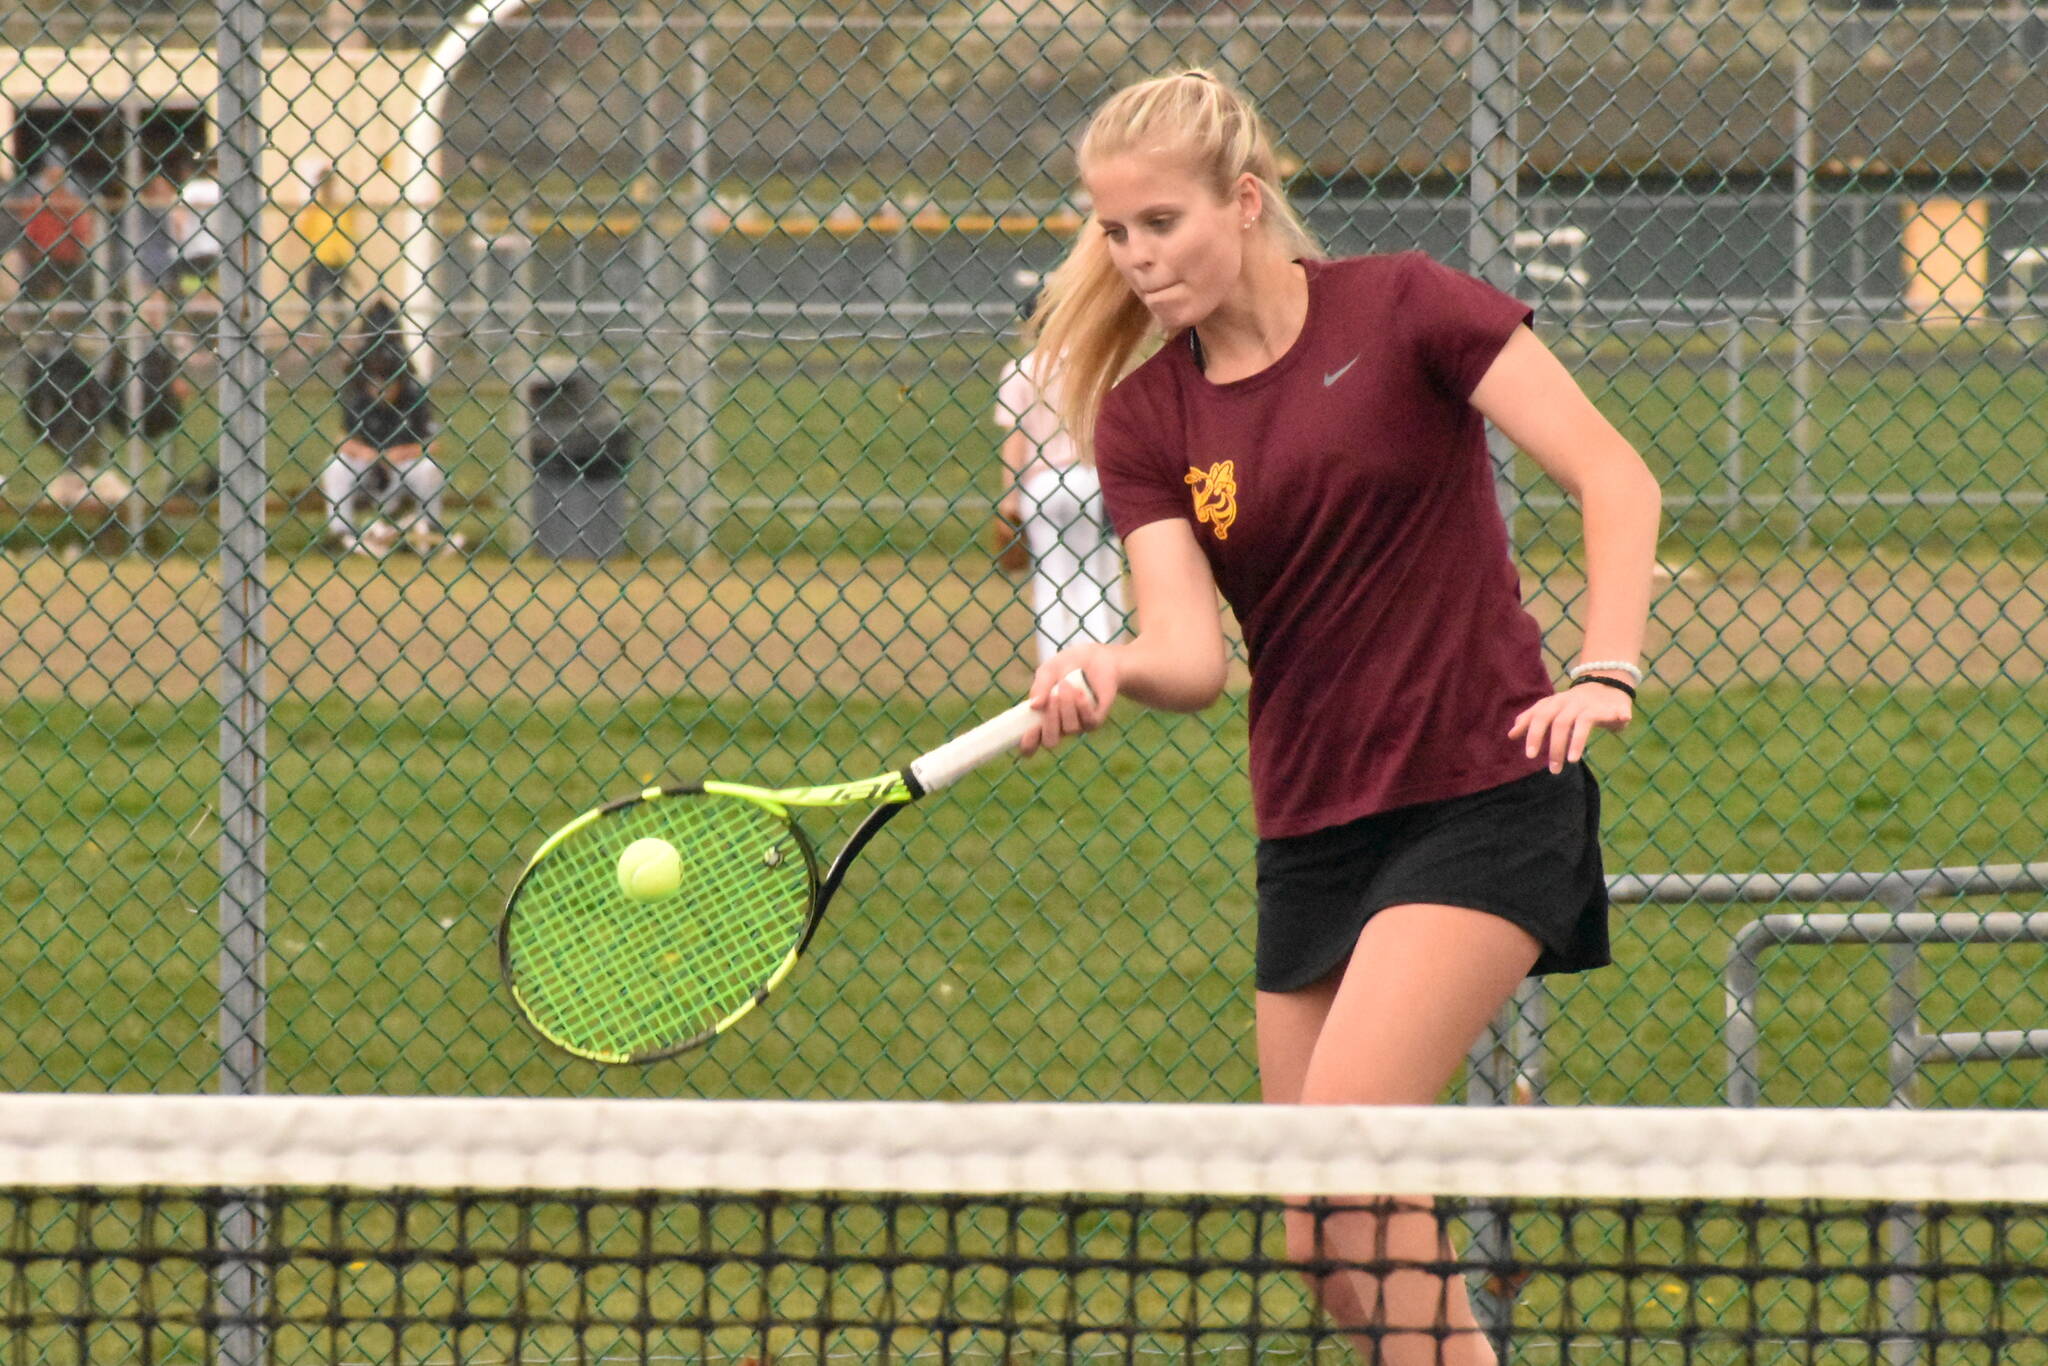 Enumclaw High’s tennis program is headed by senior Macy Furtwangler. Last spring, she took top honors as the SPSL 2A Most Valuable Player in singles. Photo by Kevin Hanson